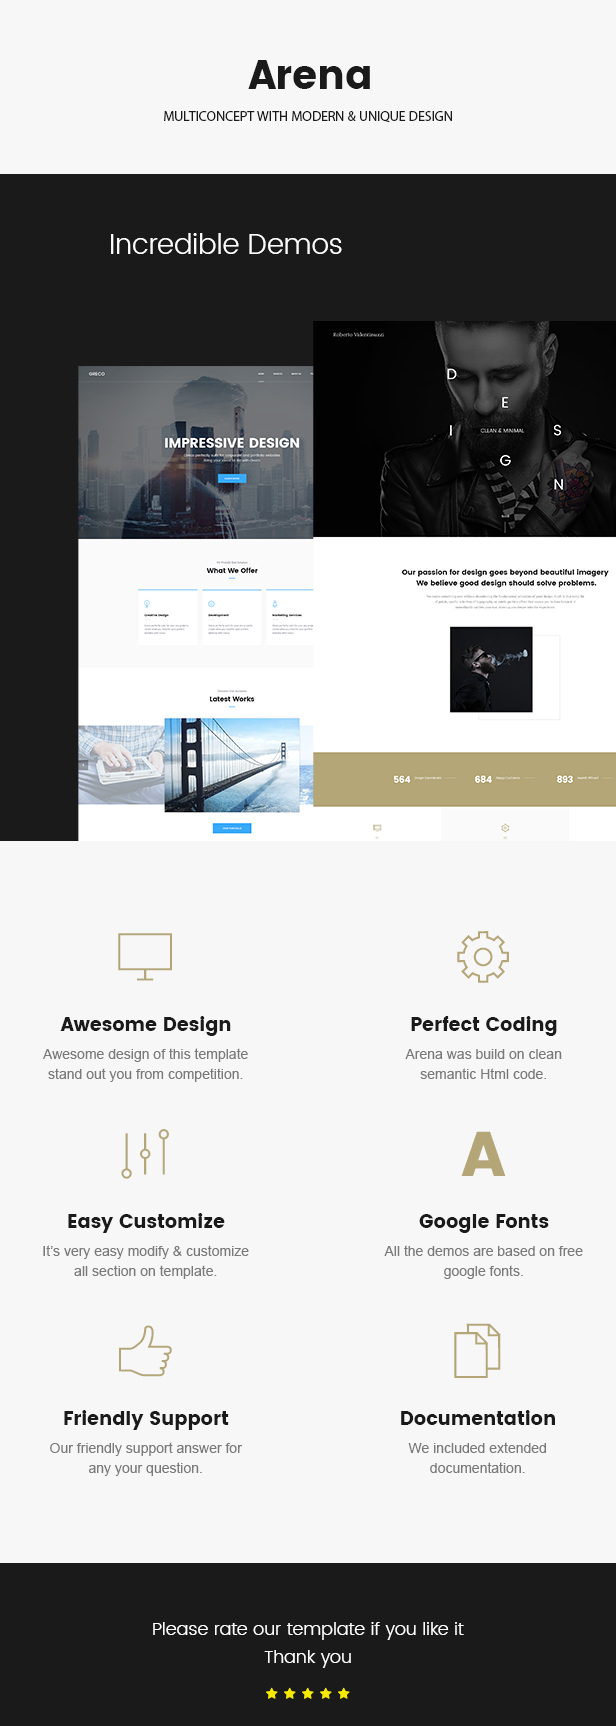 ARENA — Multiconcept HTML5 Template - 1